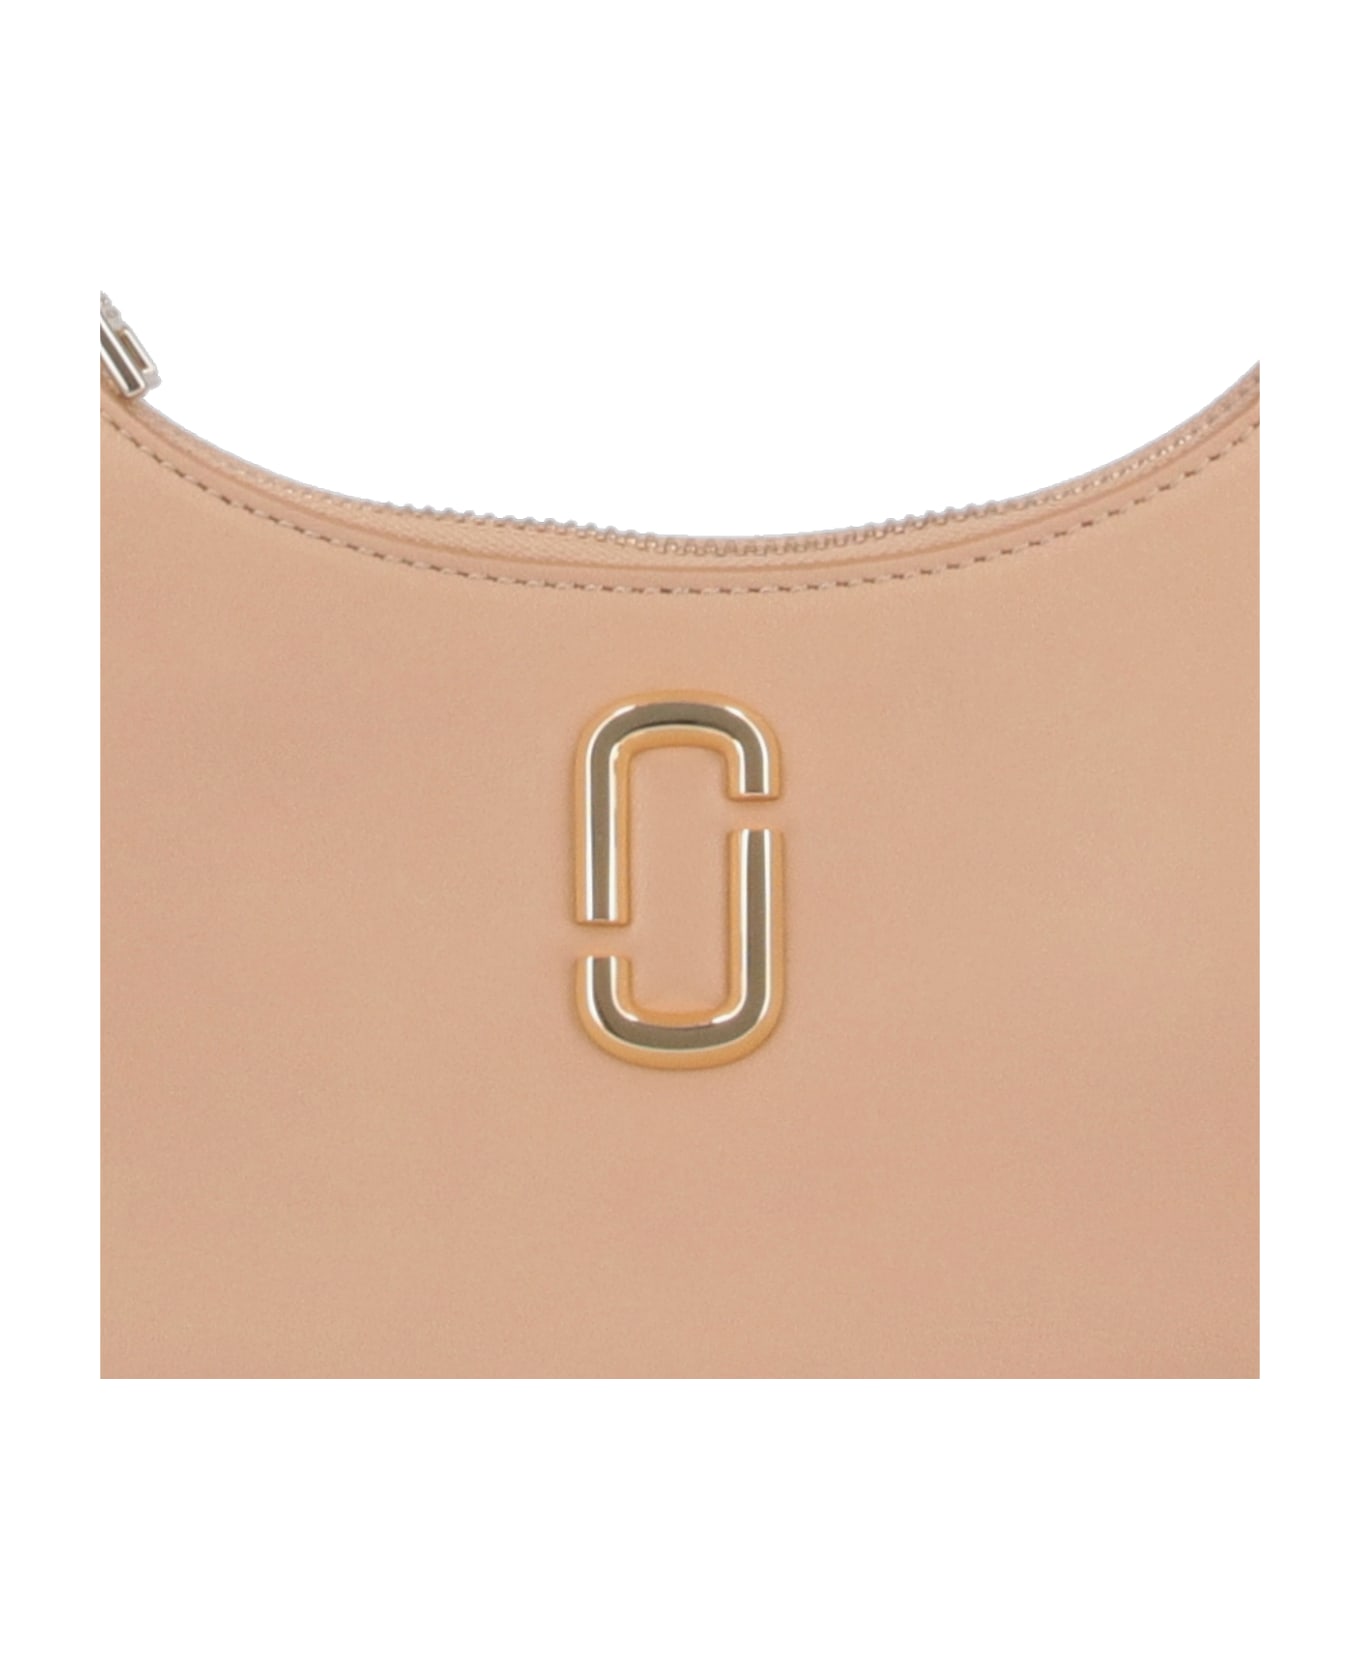 Marc Jacobs The Small Curve Bag - Camel